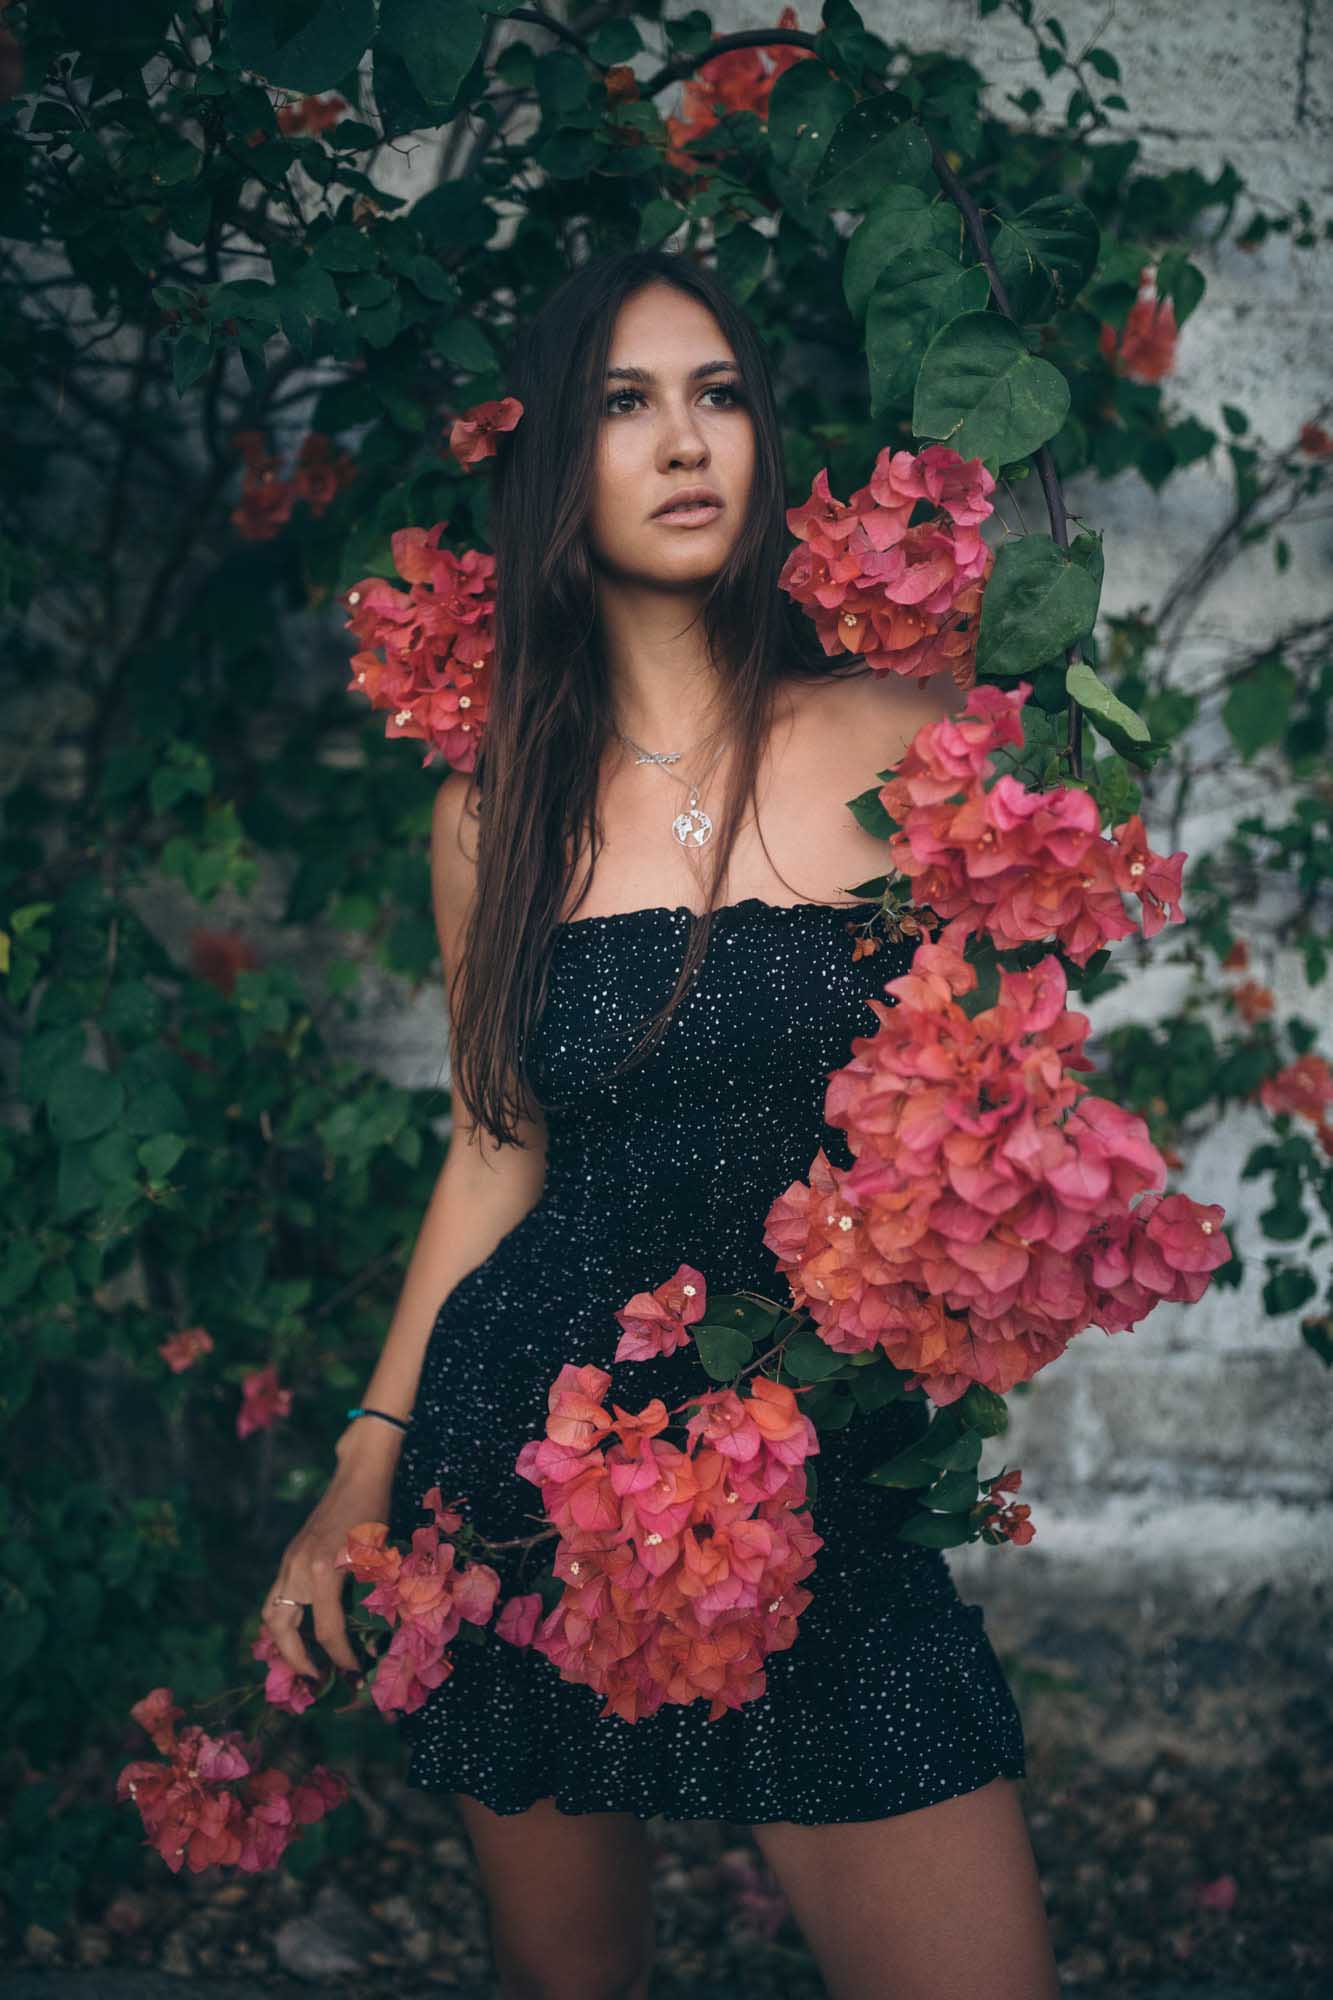 Woman in sexy black dress poses with red flowers | Fashion Photography | Portrait | Lifestyle Photography | Canggu ,Bali, Indonesia | Sexy | Hot | Denver Photographer